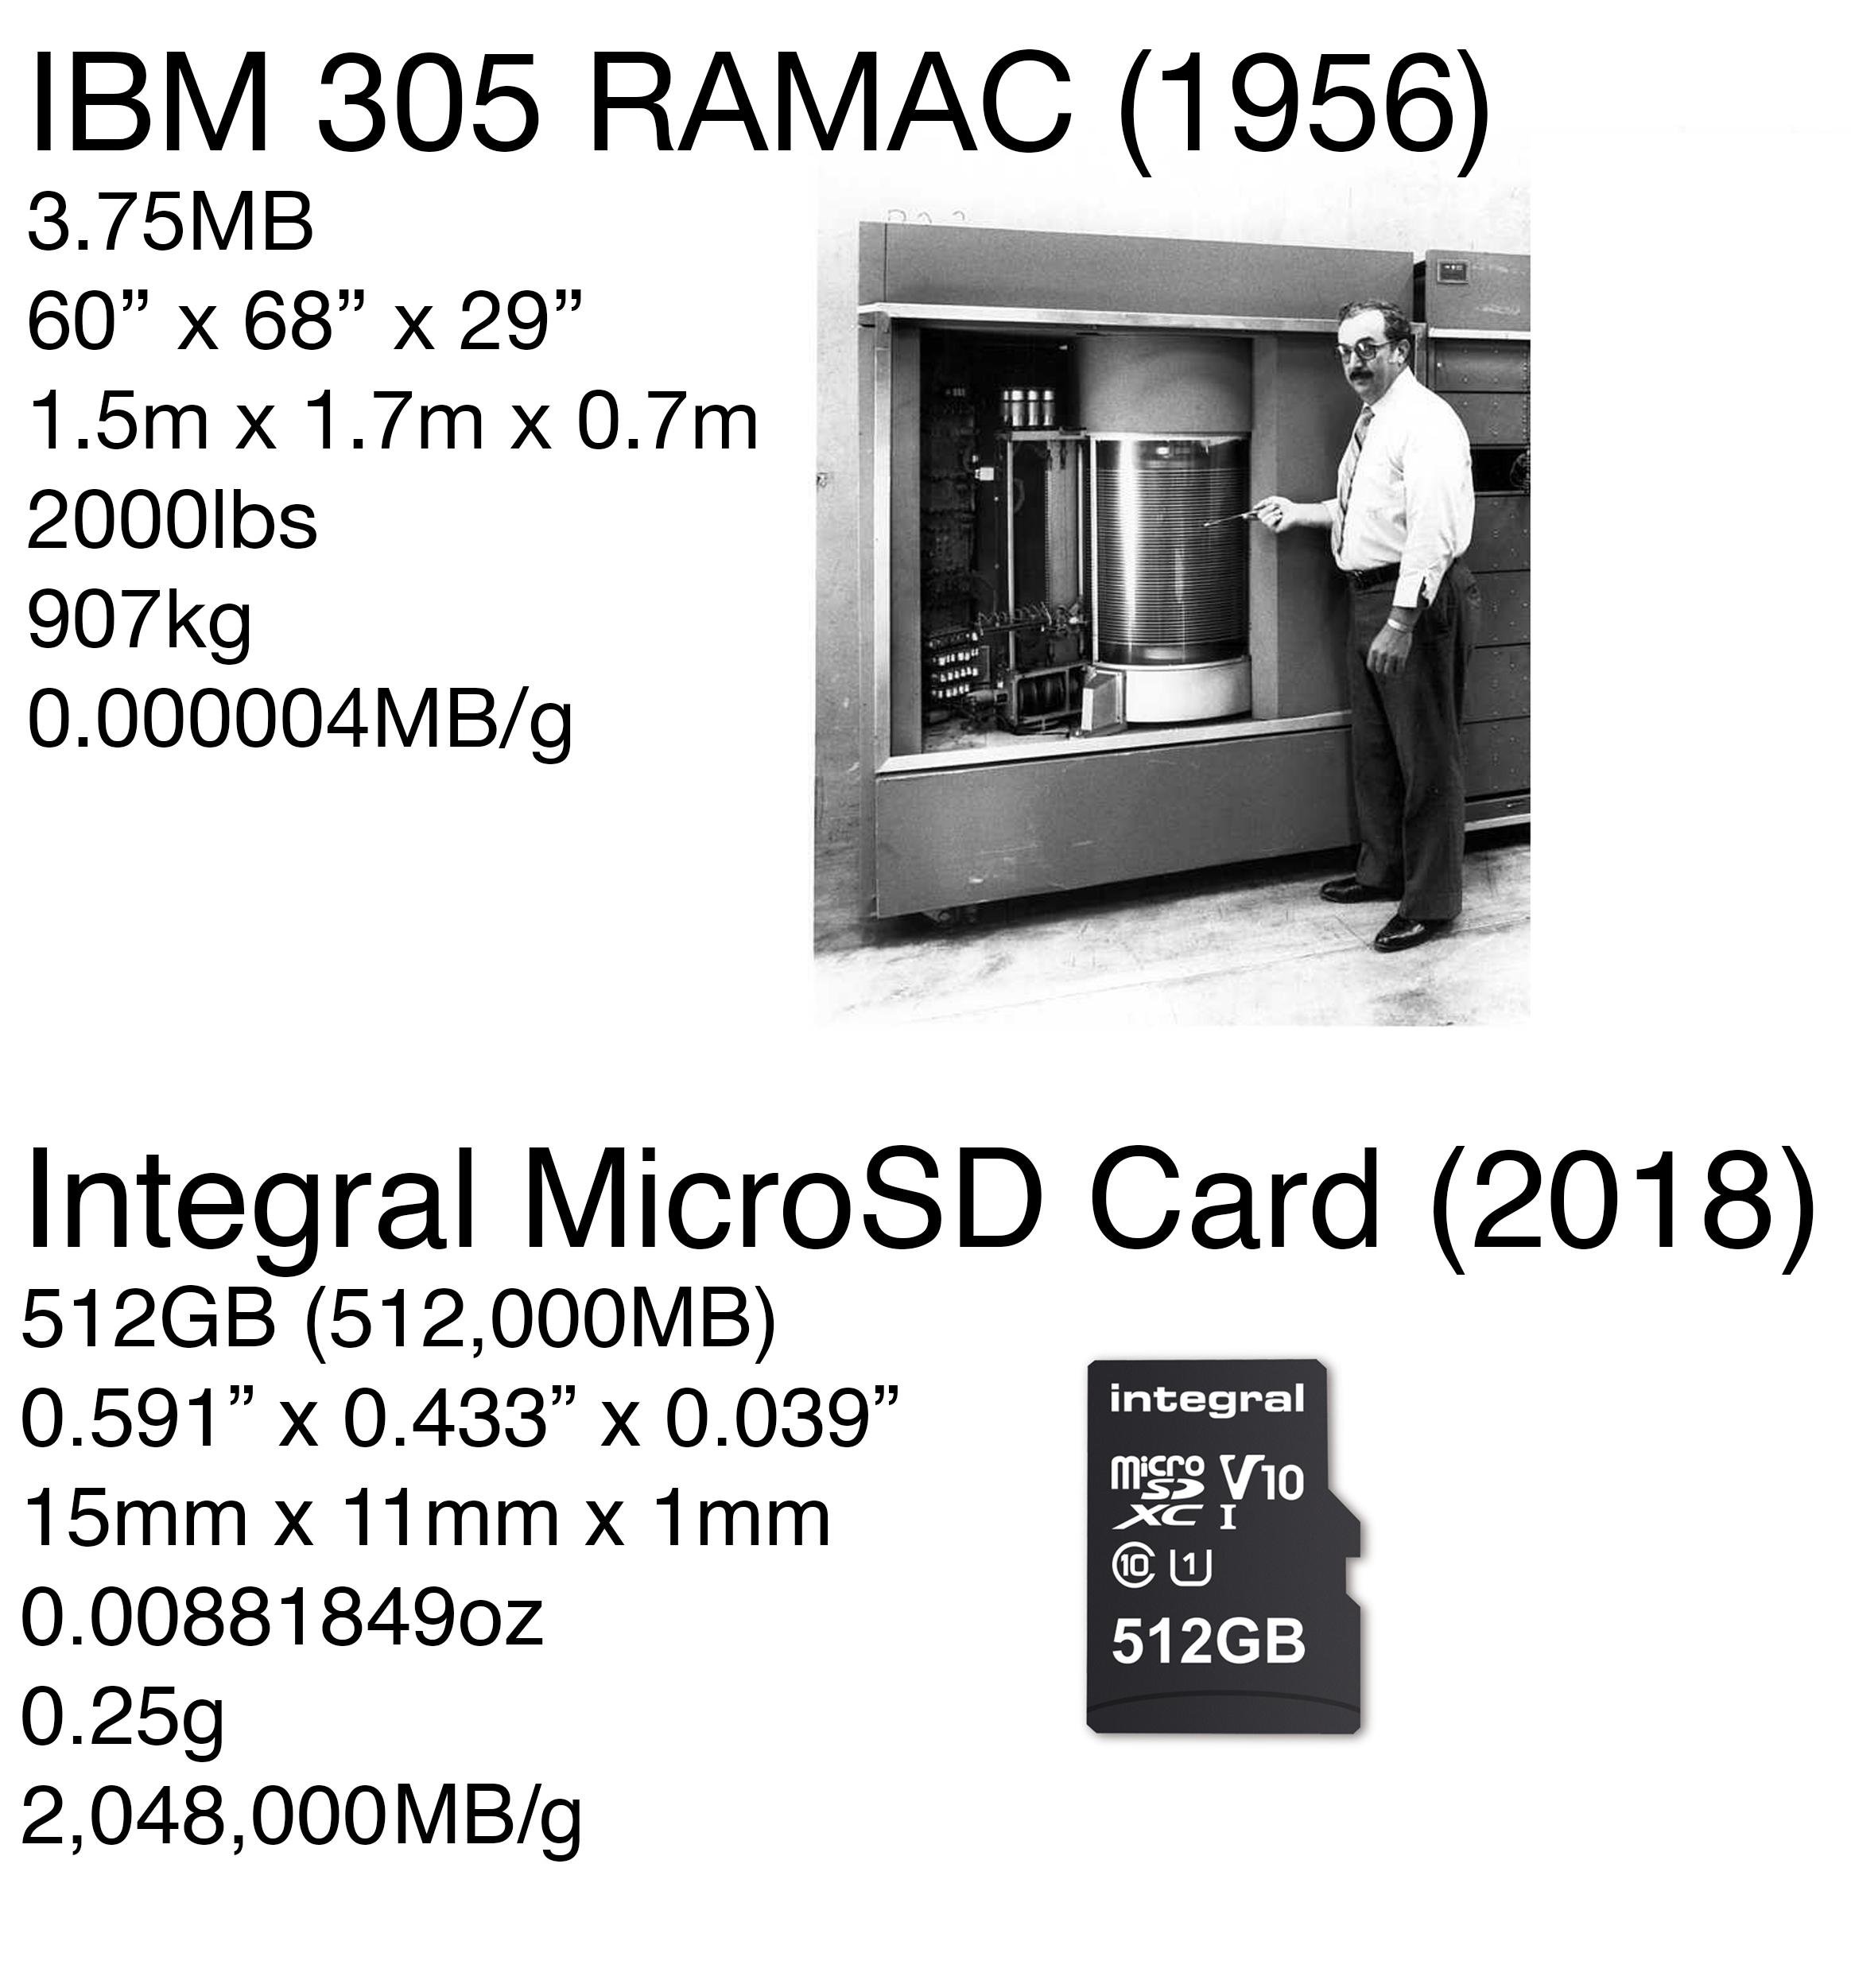 Computer+Storage+in+1956%2C+and+Storage+in+2018